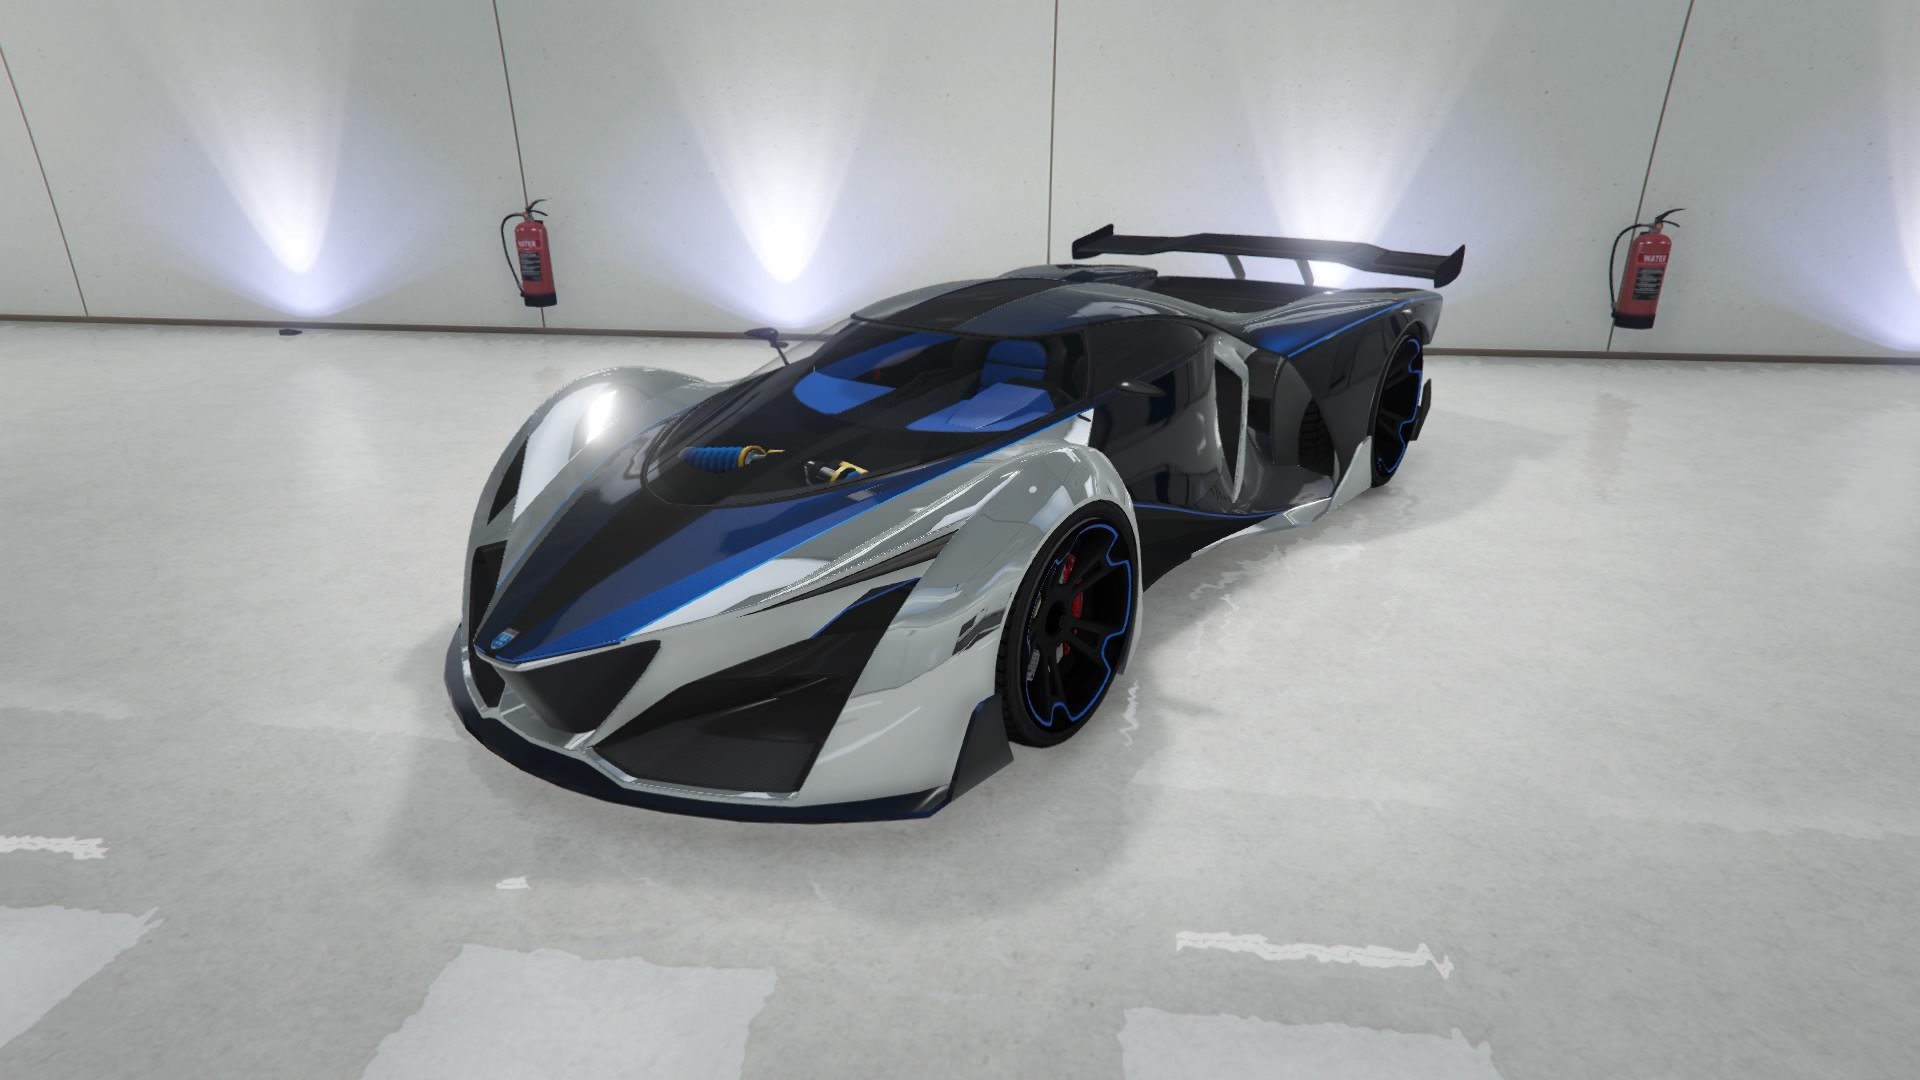 What Do You All Think Of The New Grotti X80 Proto Grandtheftautov